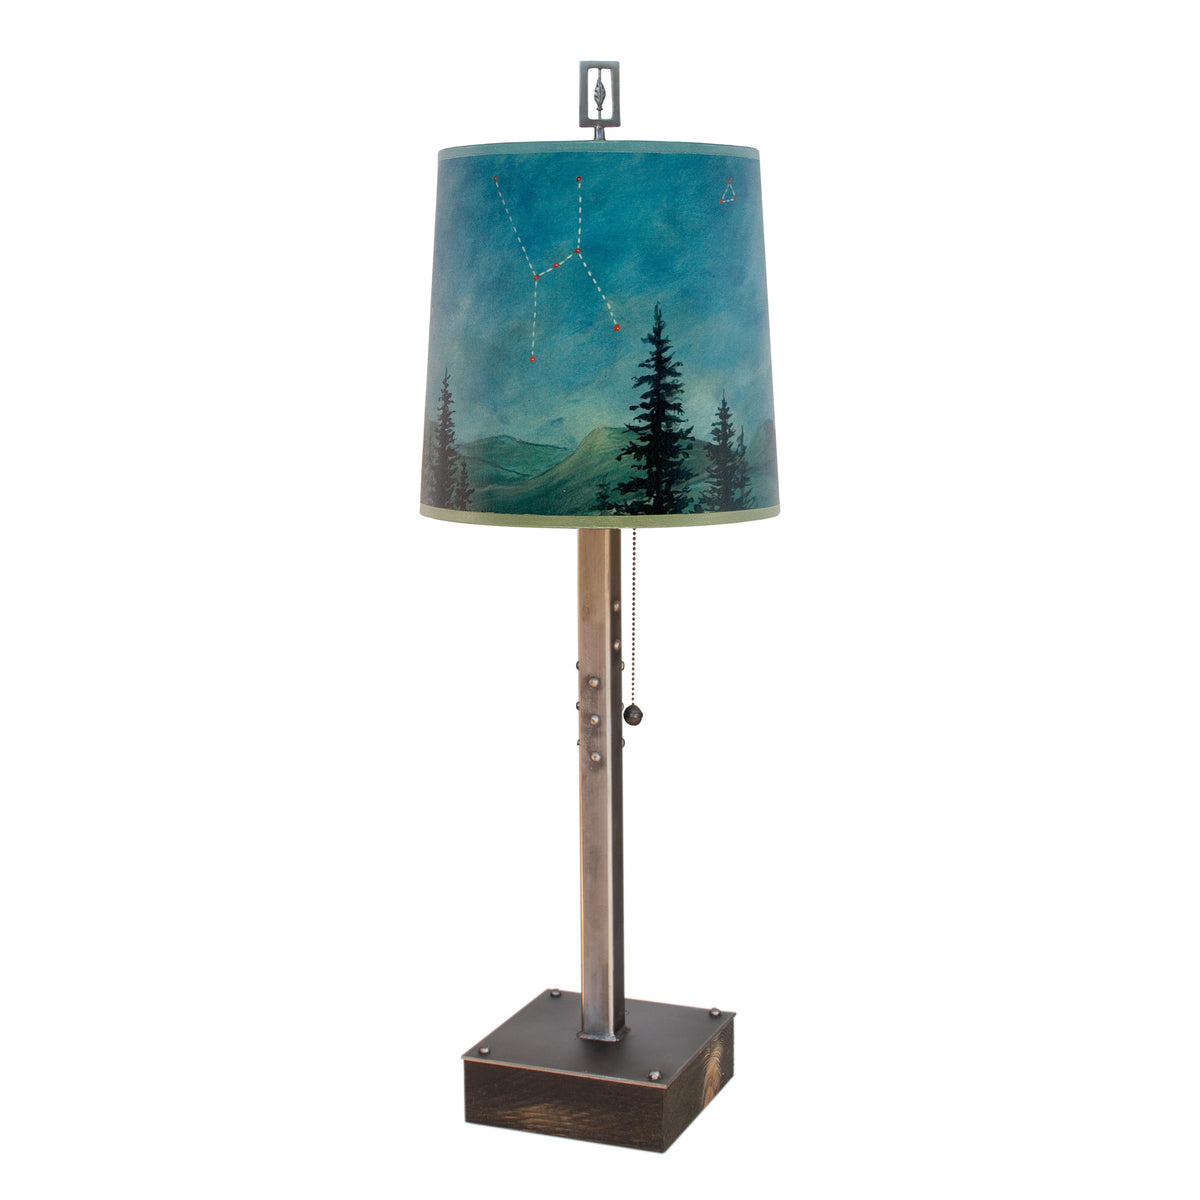 Janna Ugone &amp; Co Table Lamps Steel Table Lamp on Wood with Medium Drum Shade in Midnight Sky